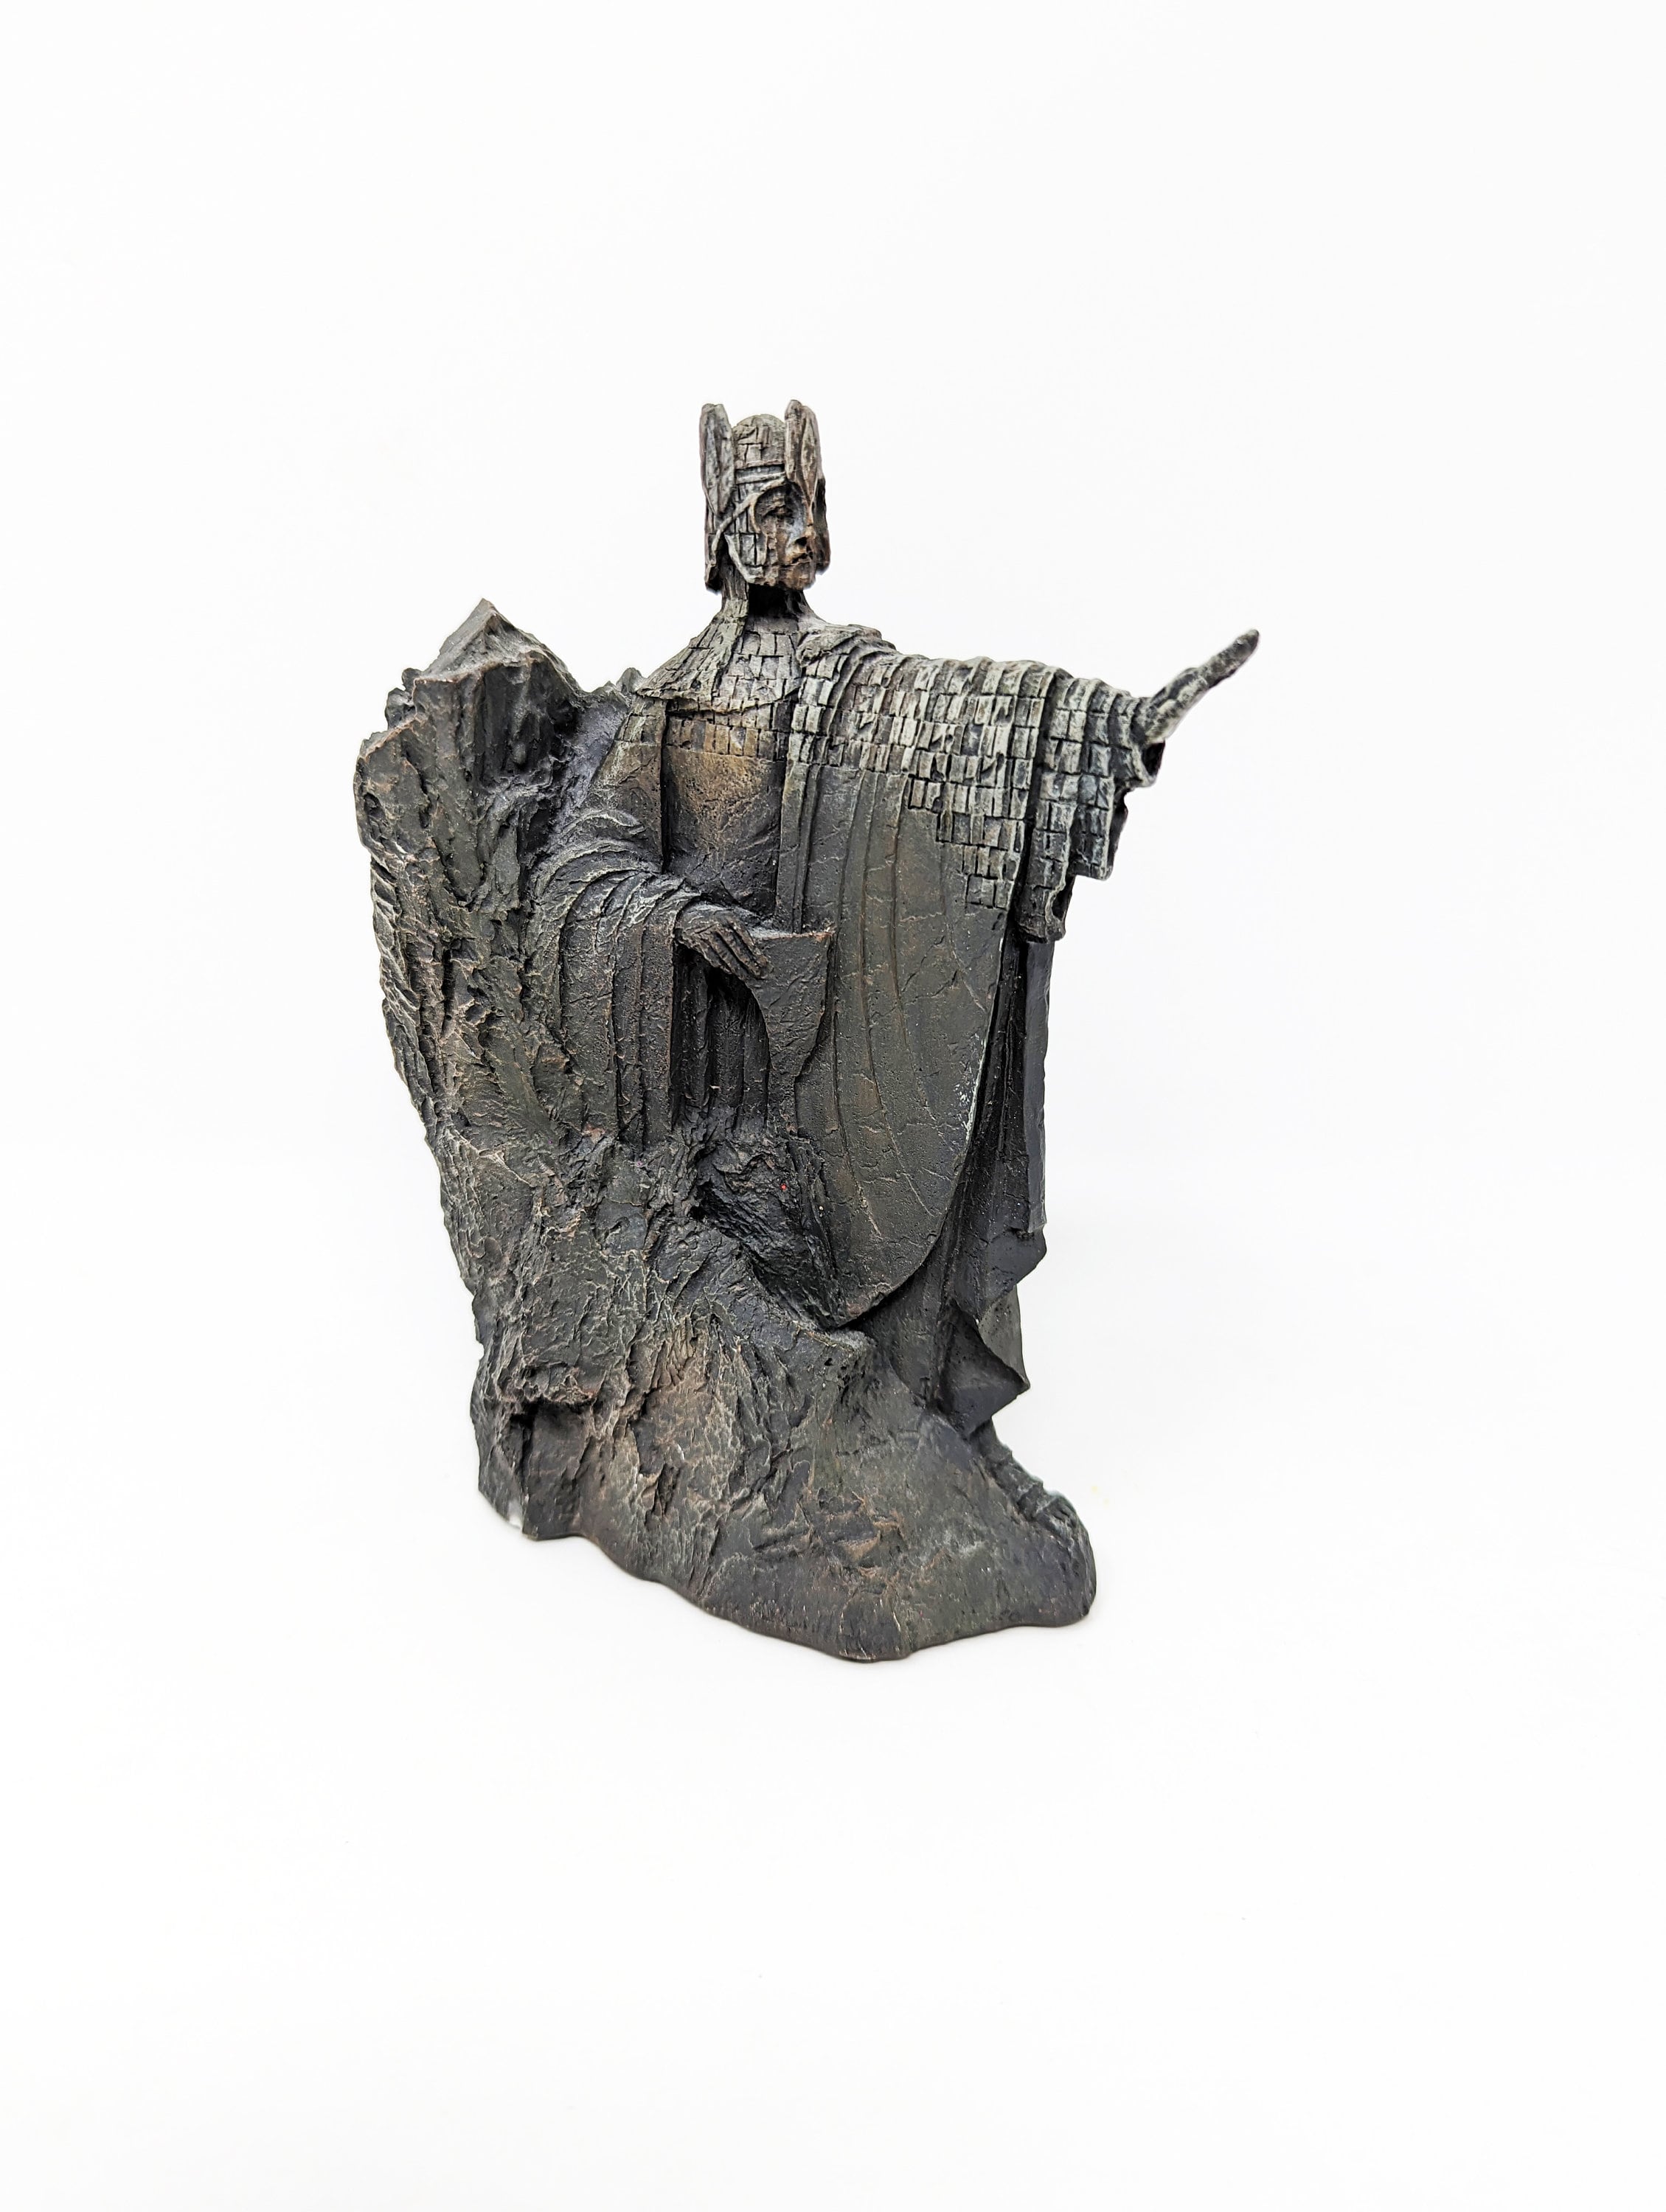 SDBRKYH Lord of The Rings Sculpture, Minas Tirith Model Creative Ashtray  Statue Desktop Decoration